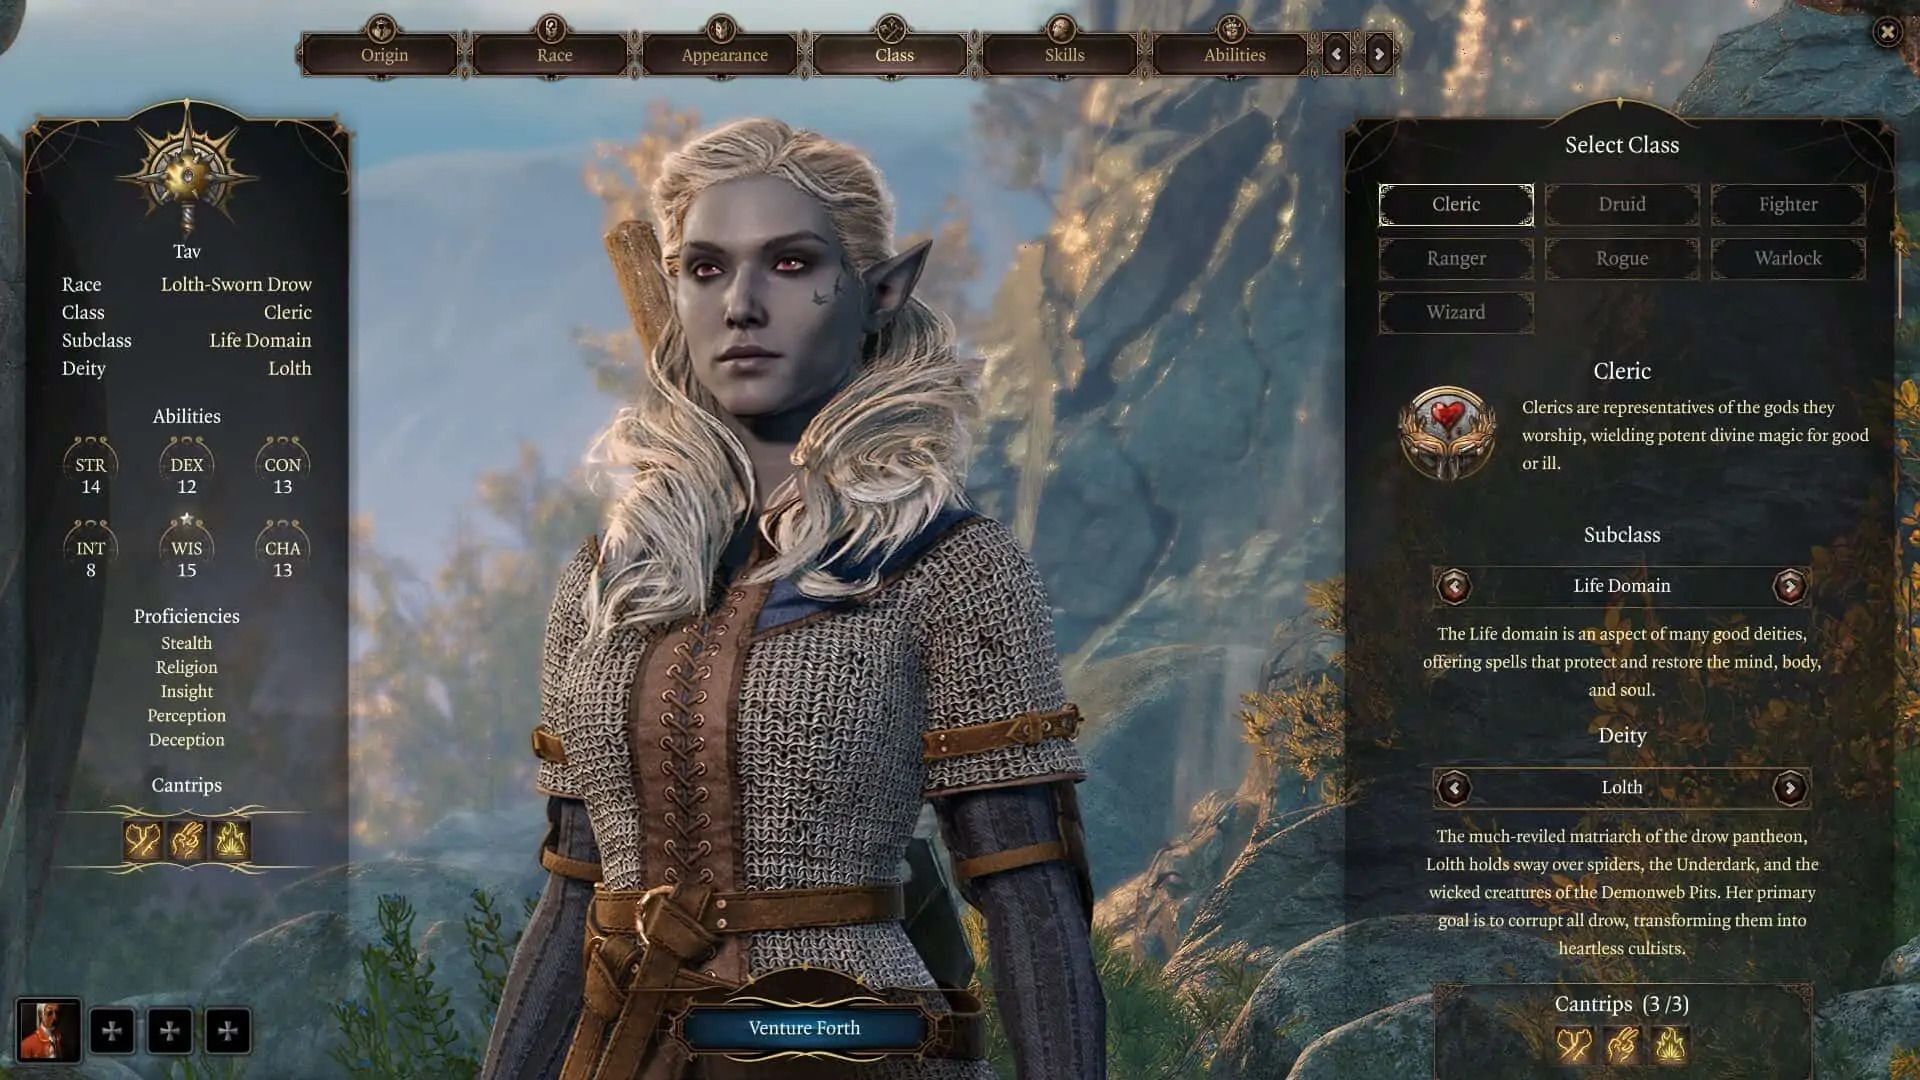 Alongside pre-designed characters, the game brings an impressive character creator